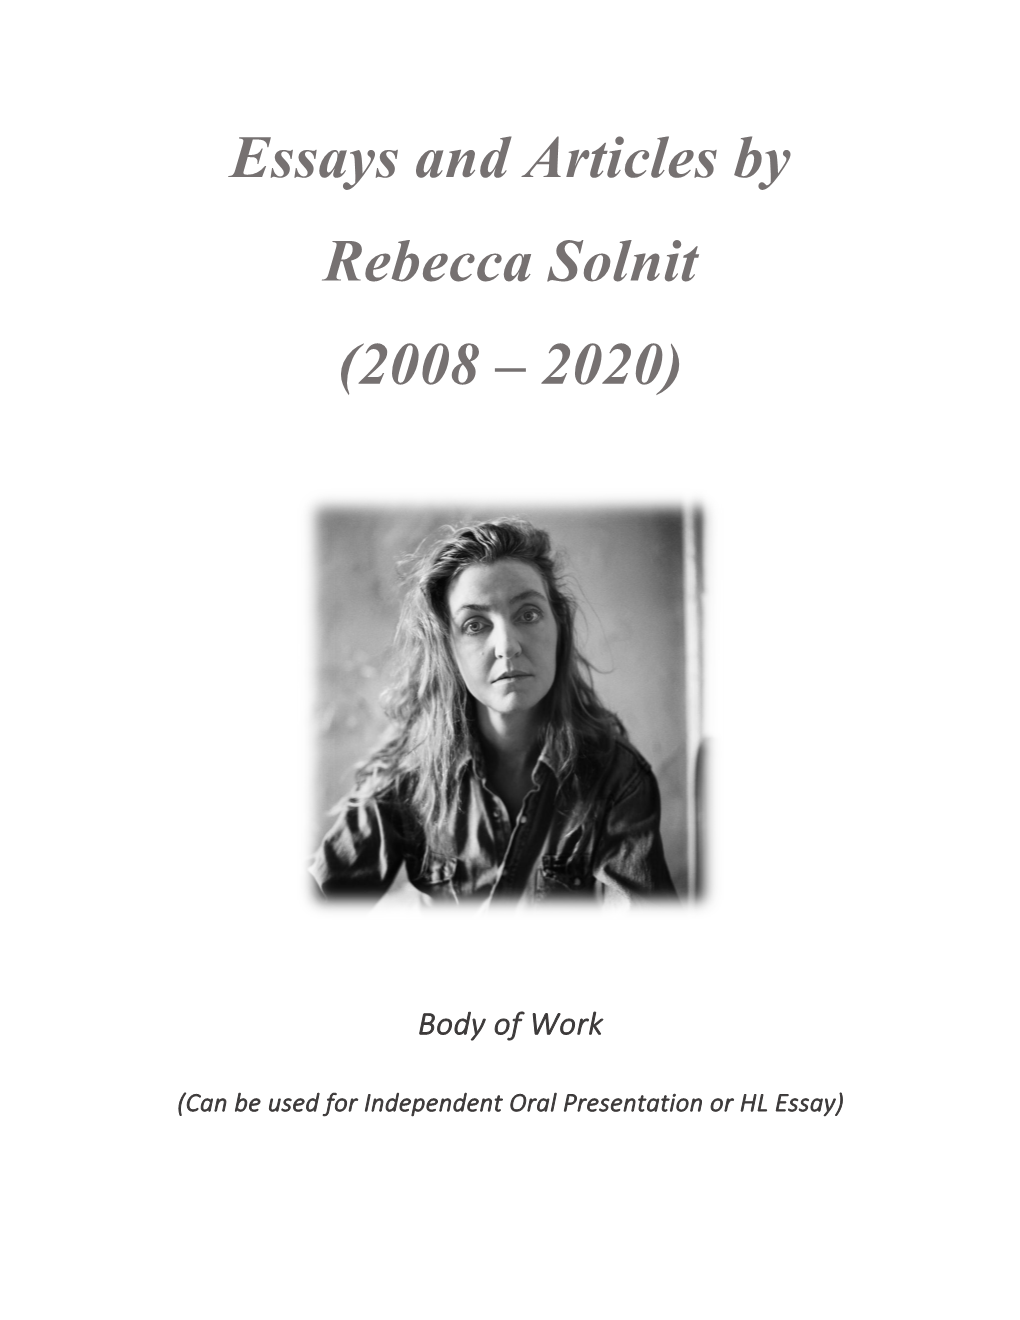 Essays and Articles by Rebecca Solnit (2008 – 2020)